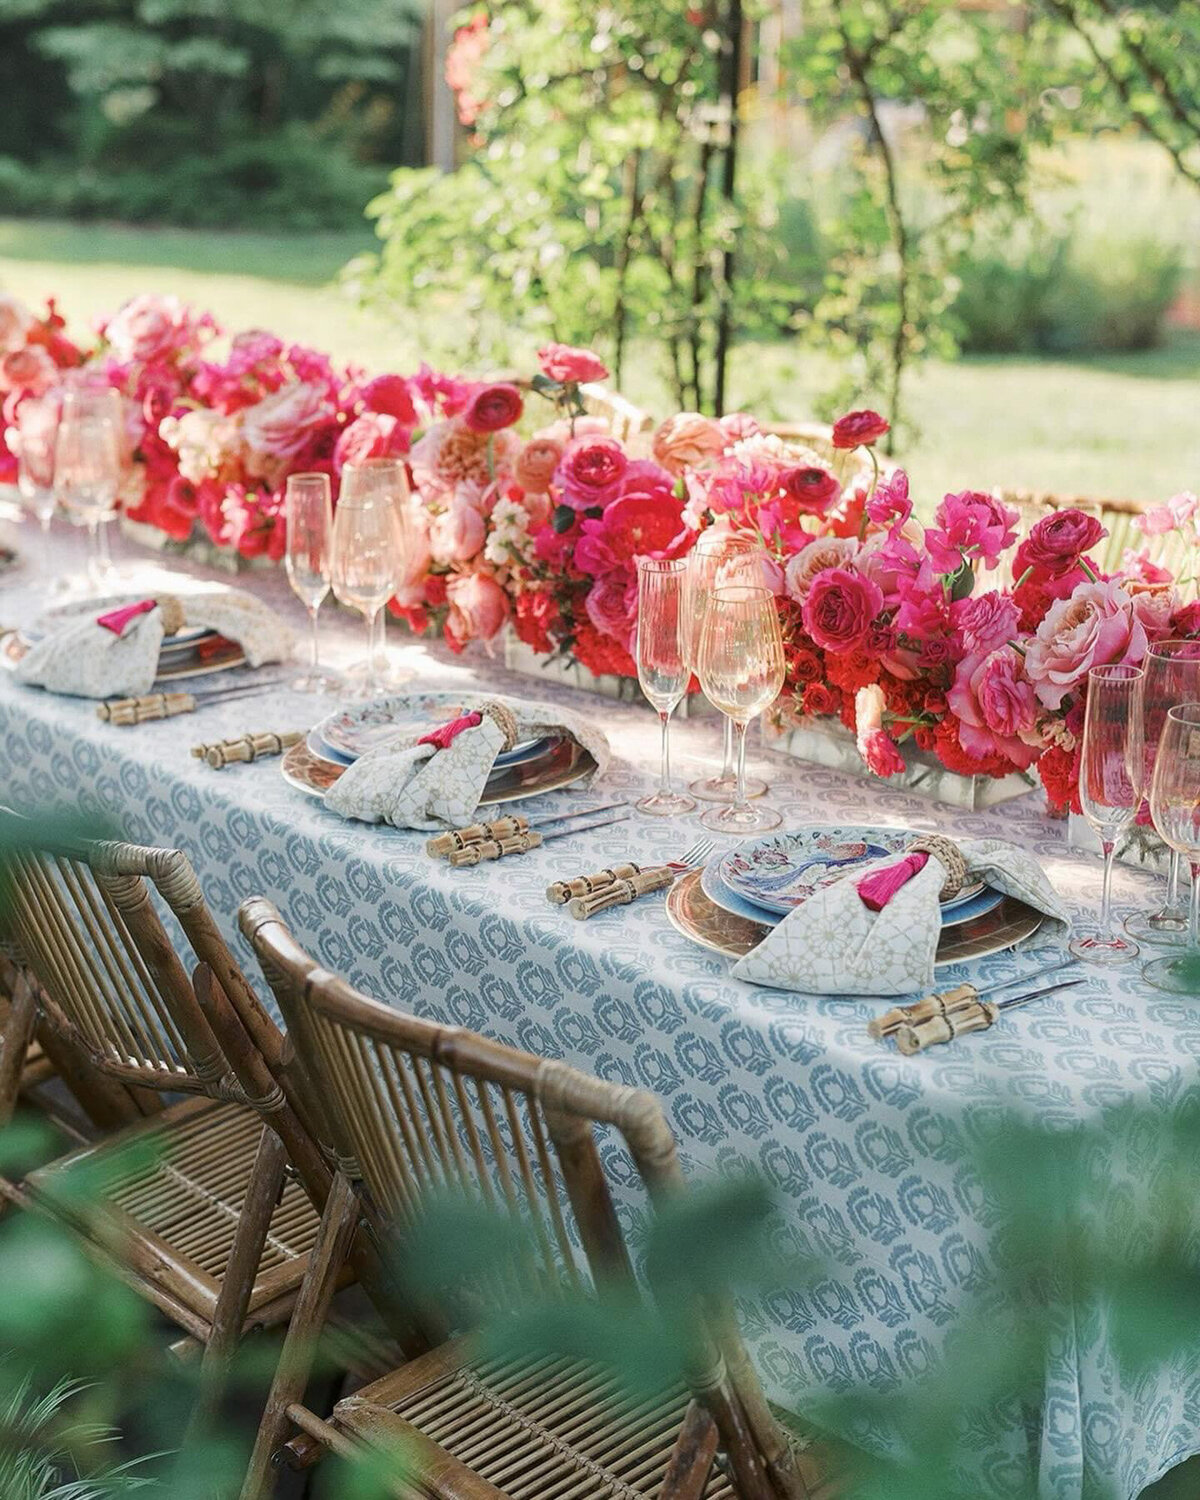 Colorful wedding reception table with pink floral centerpieces